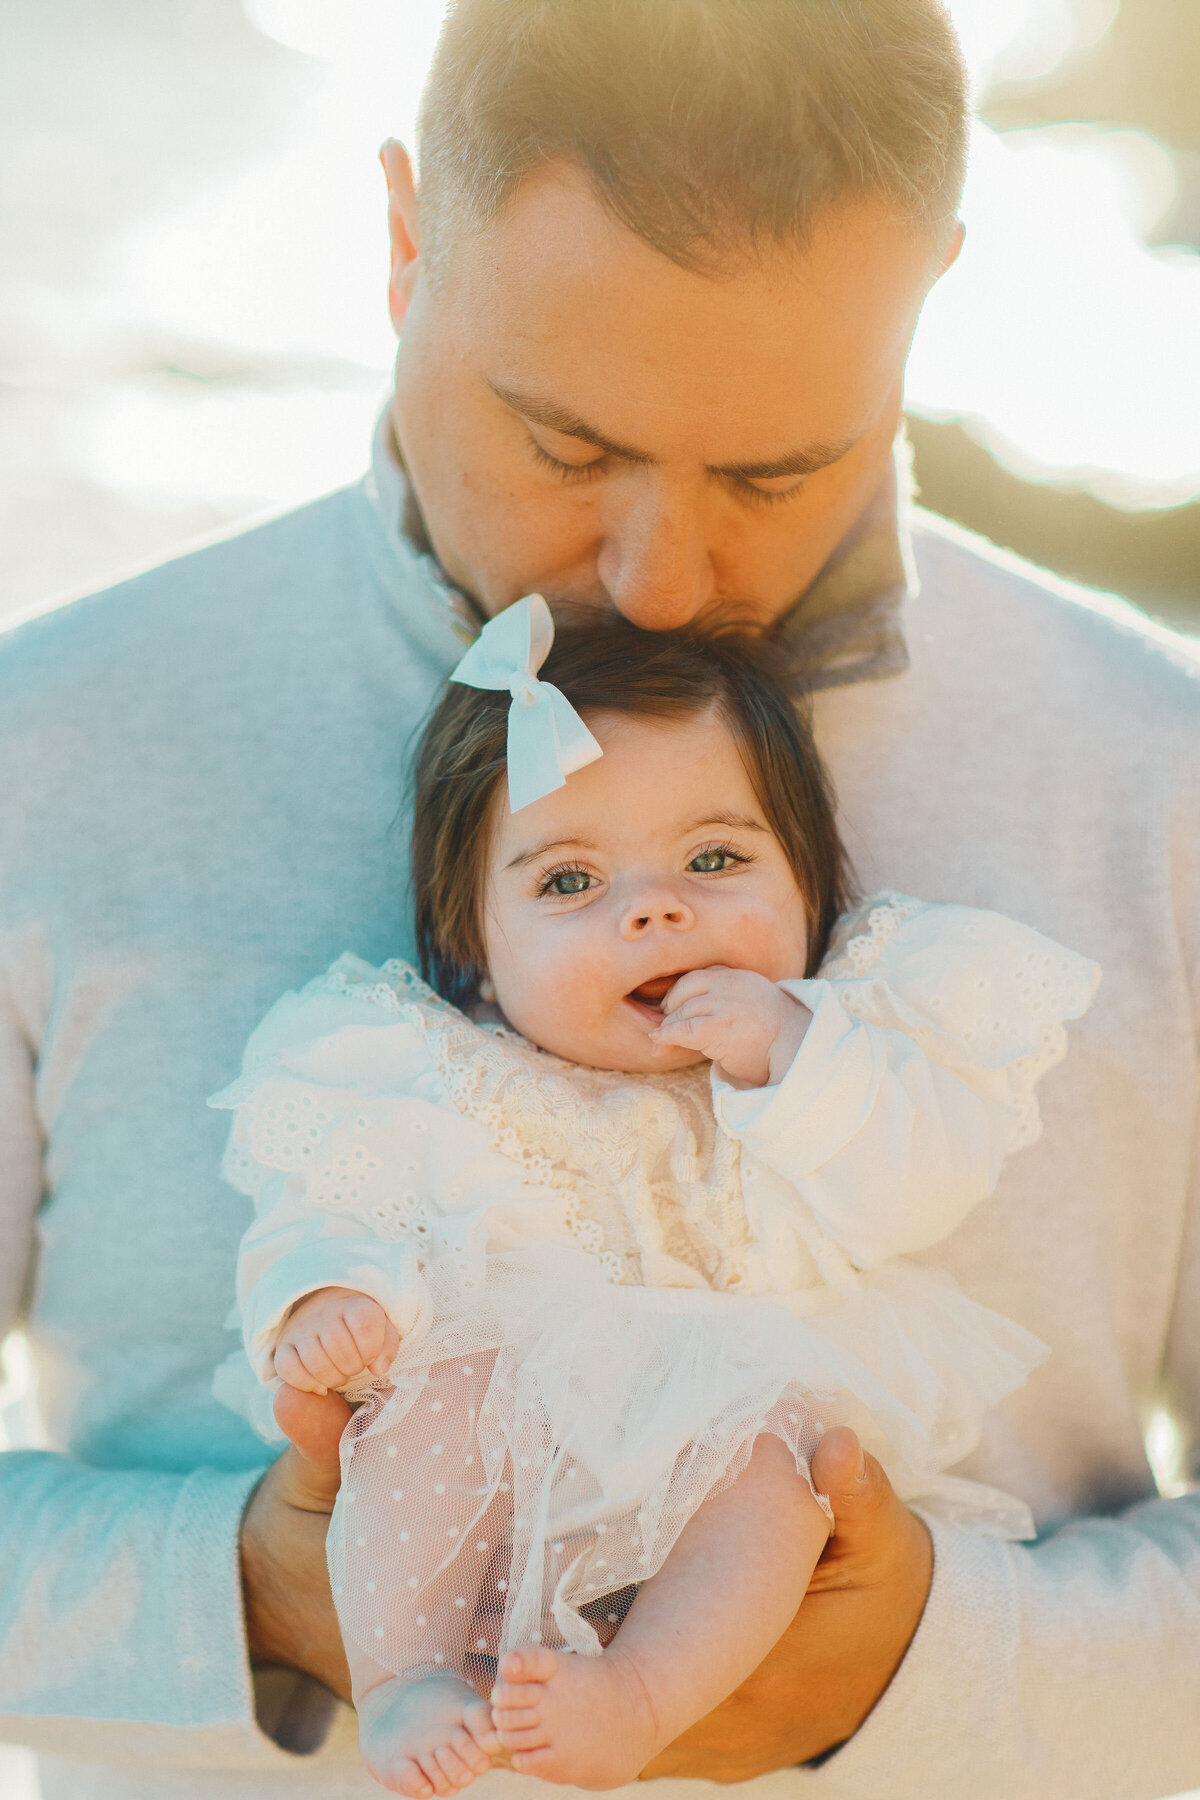 Family Portrait Photo Of Father And Baby In White Outfit Los Angeles